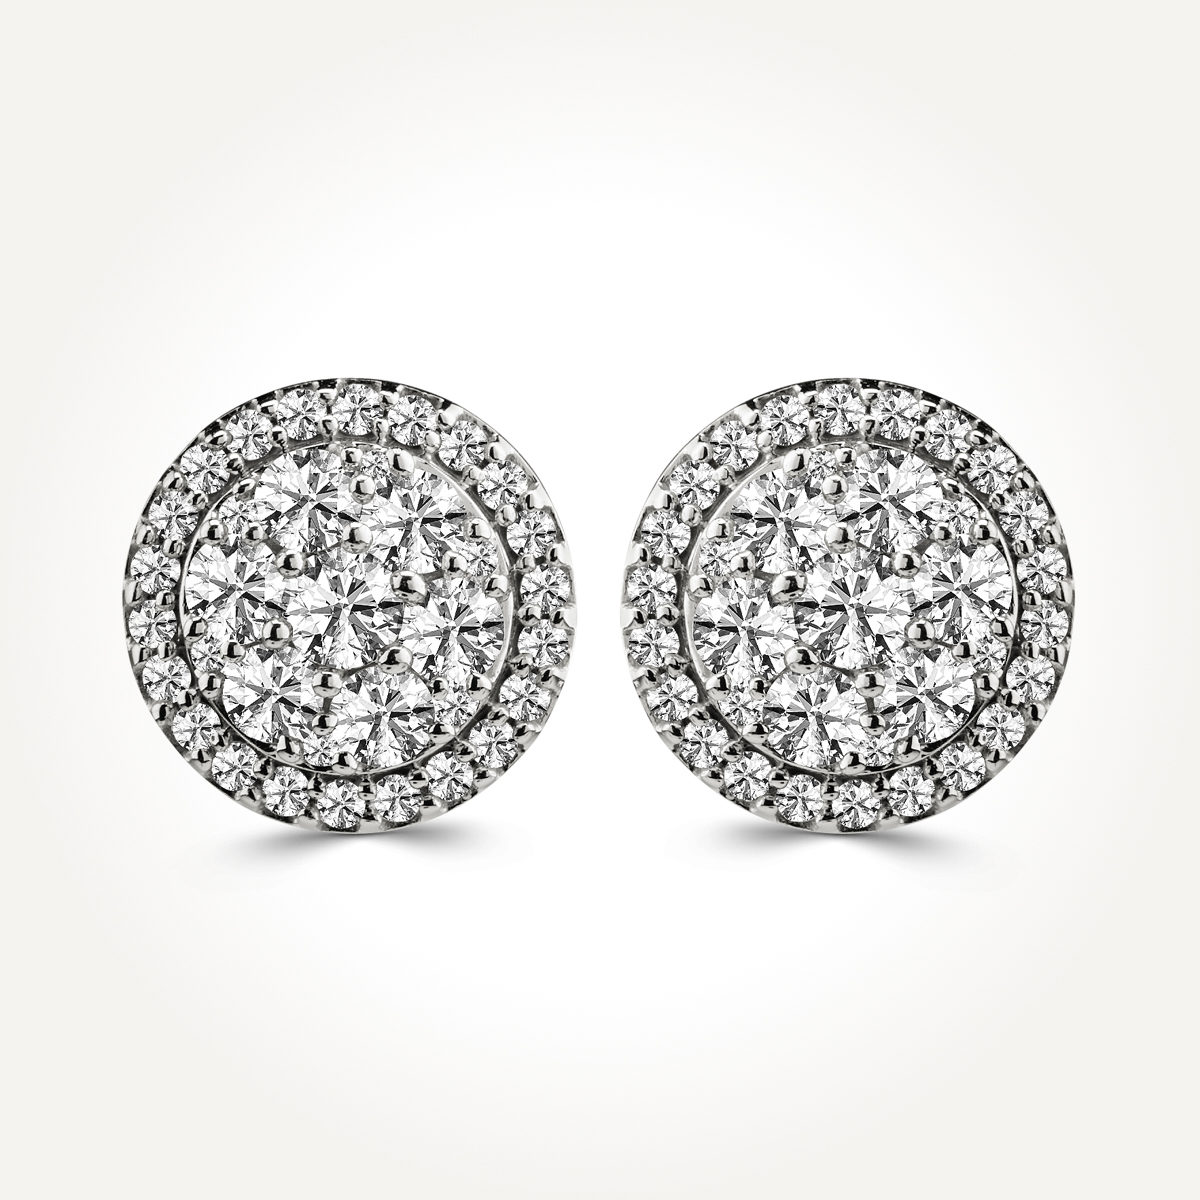 14KT White Gold Round Diamond Cluster Stud Earrings 1.00 CT. T.W.